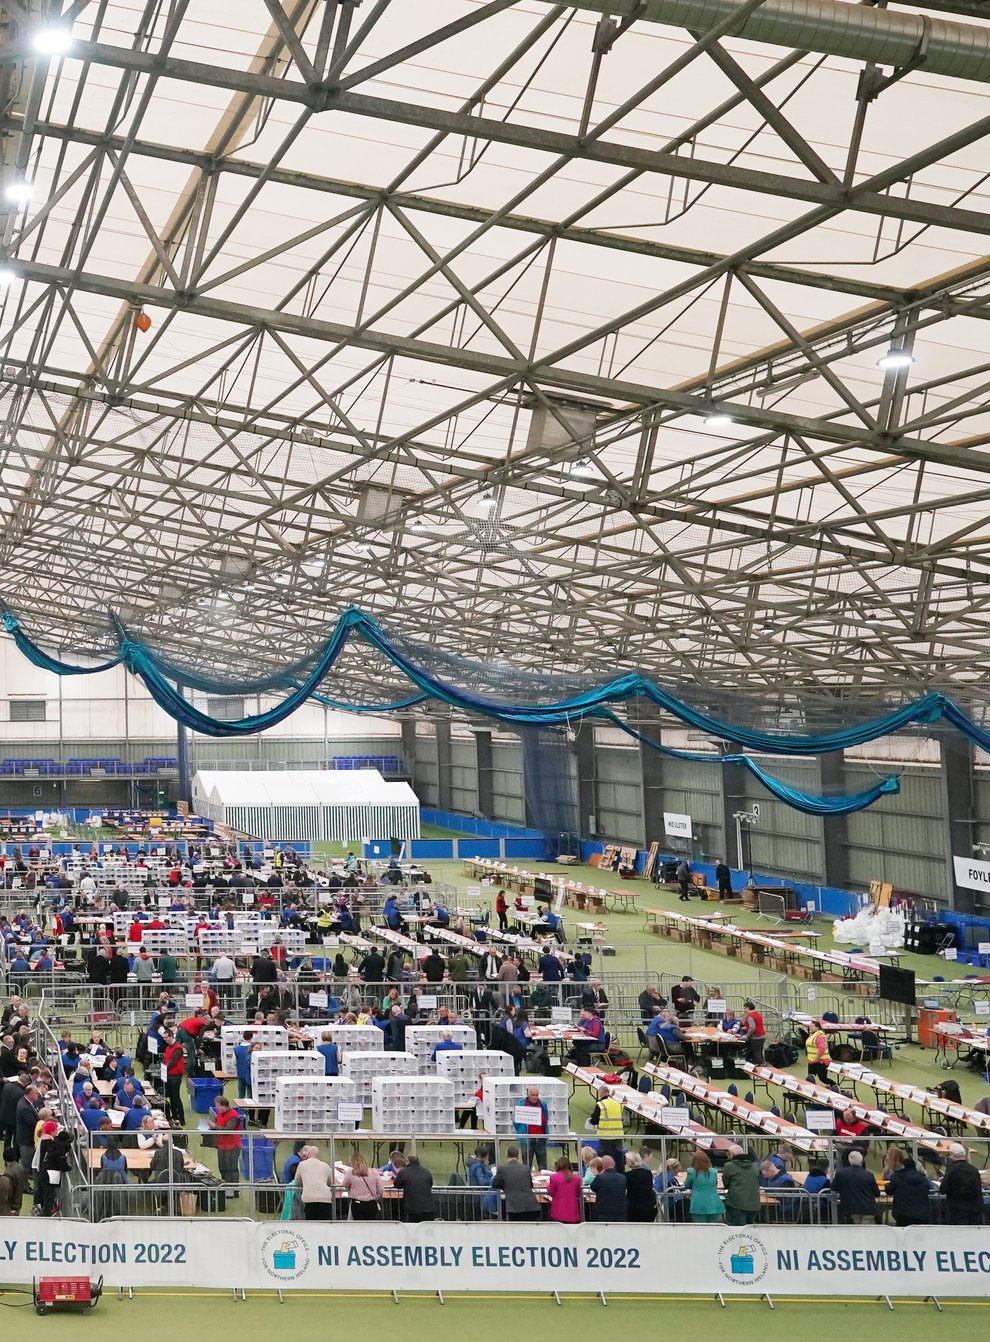 A general view of votes being counted at the Northern Ireland Assembly Election count centre at Meadowbank Sports arena in Magherafelt in Co County Londonderry (Niall Carson/PA)